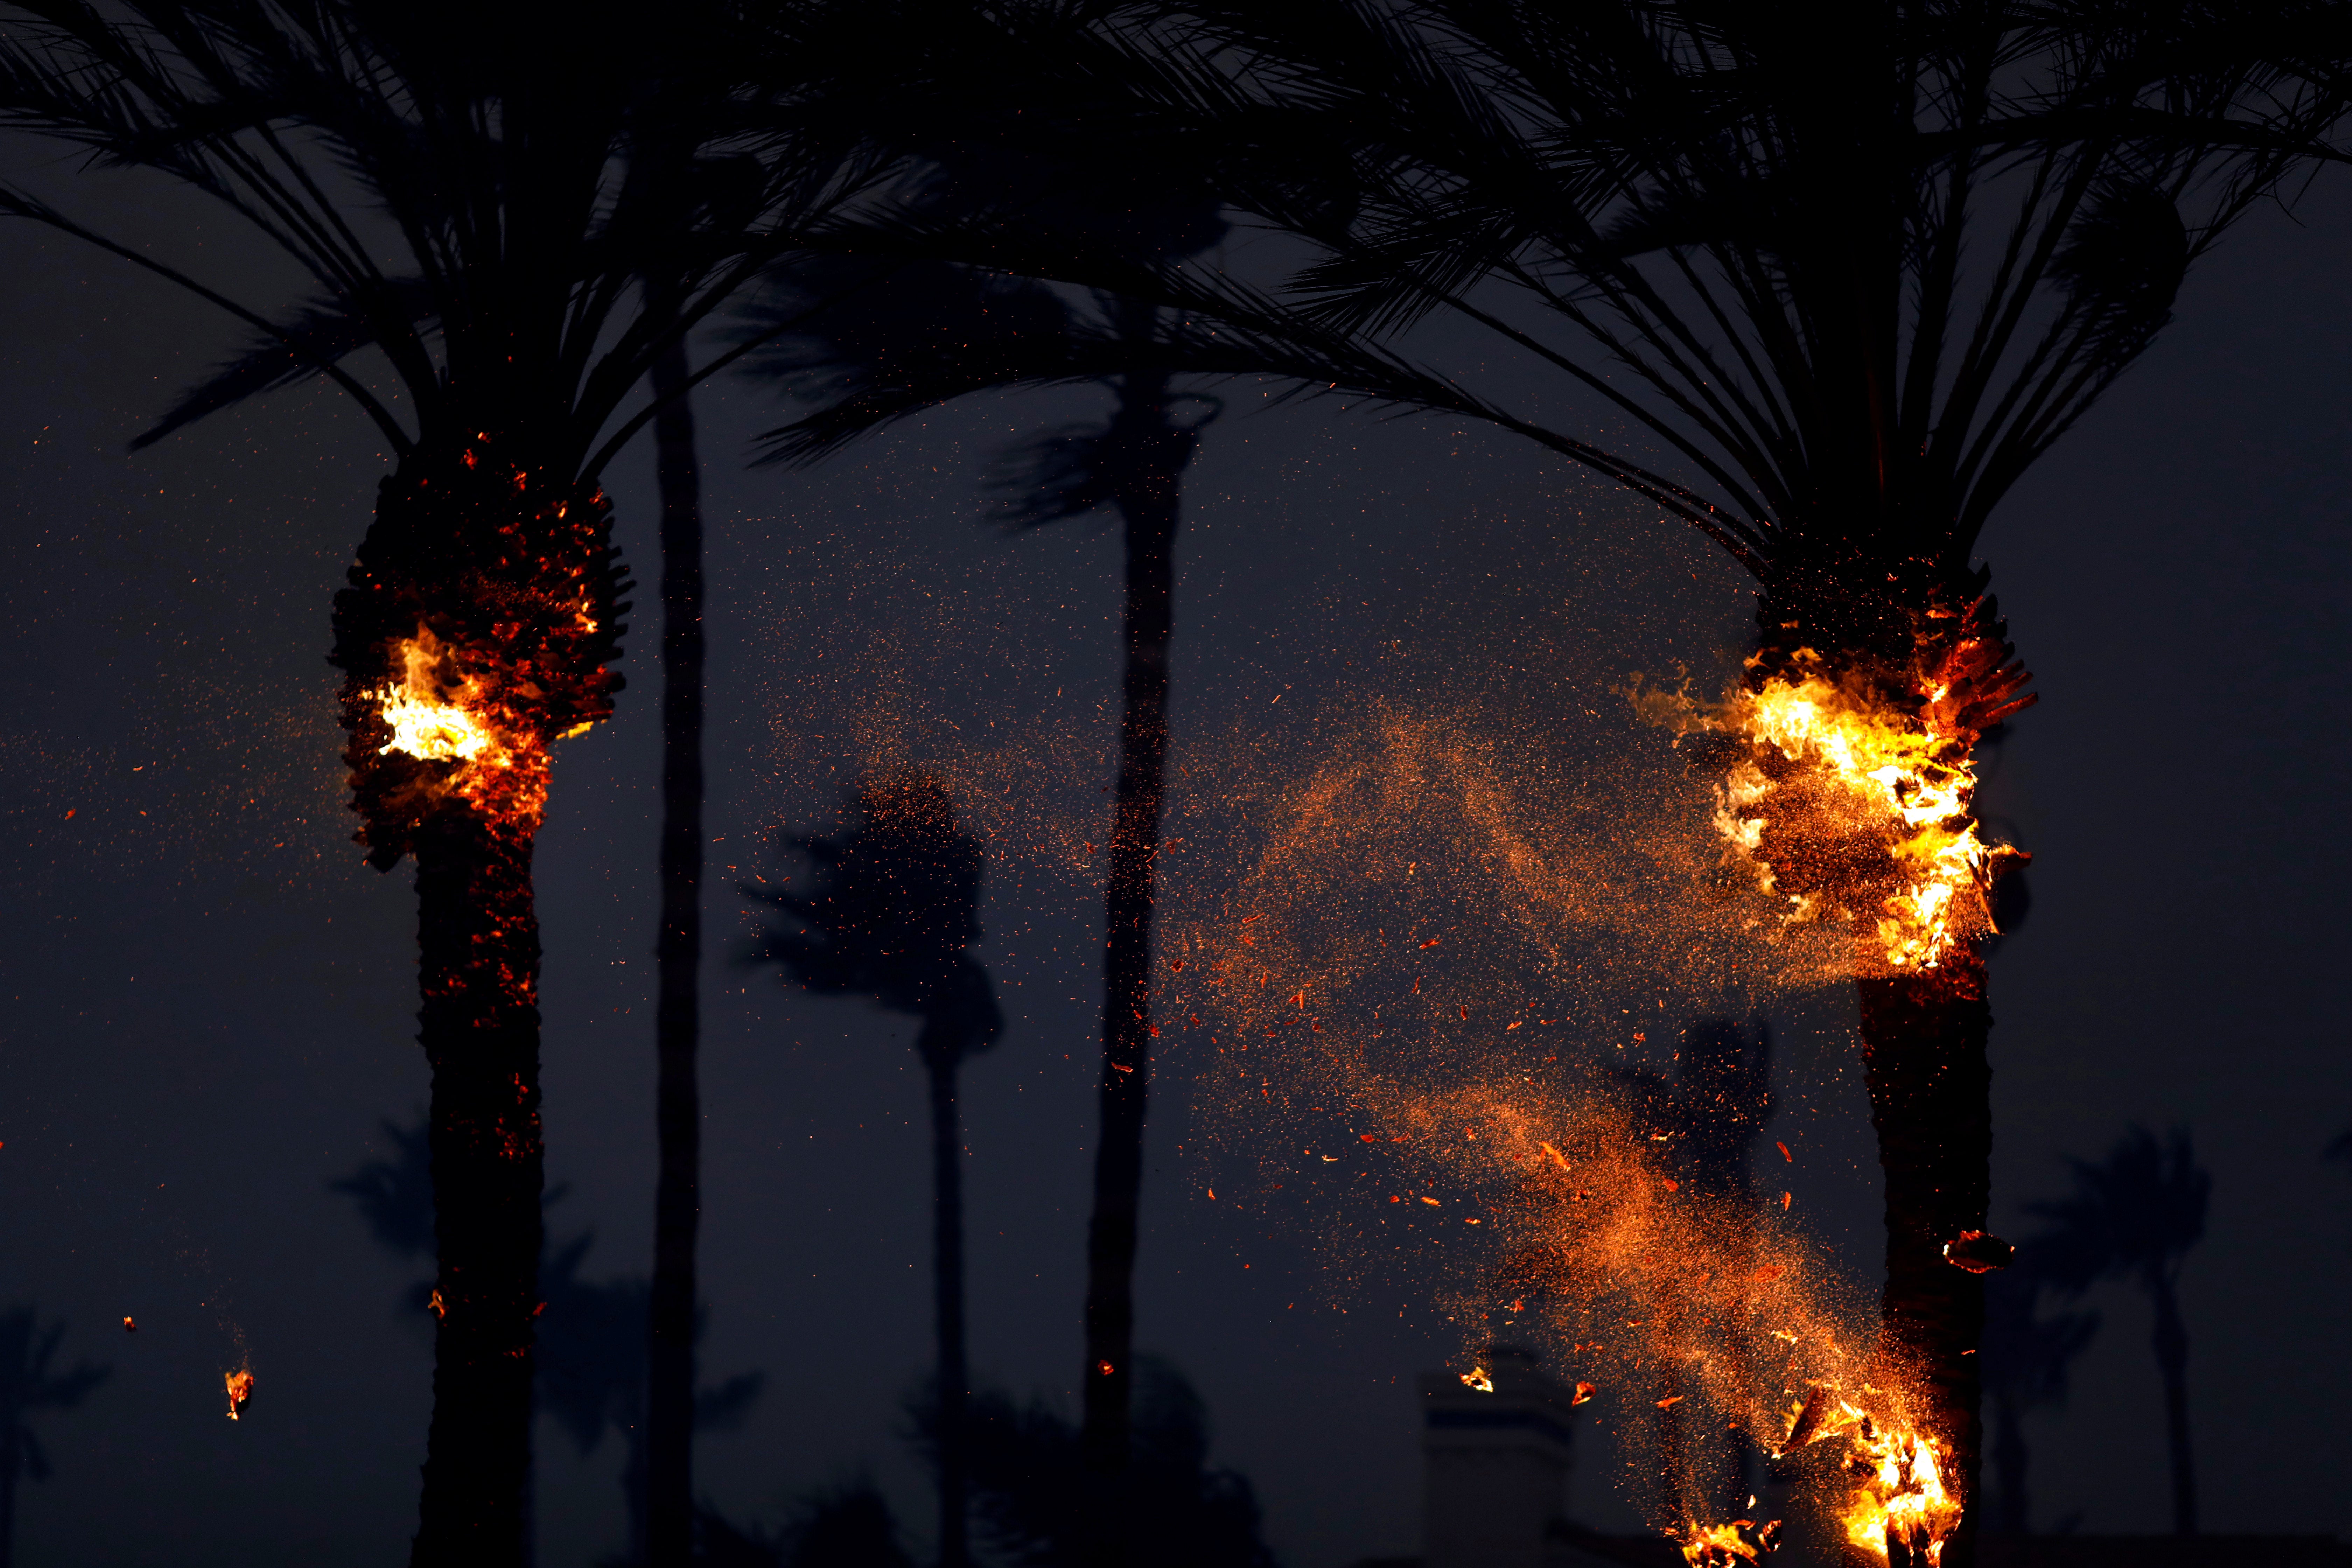 Palm trees on fire.